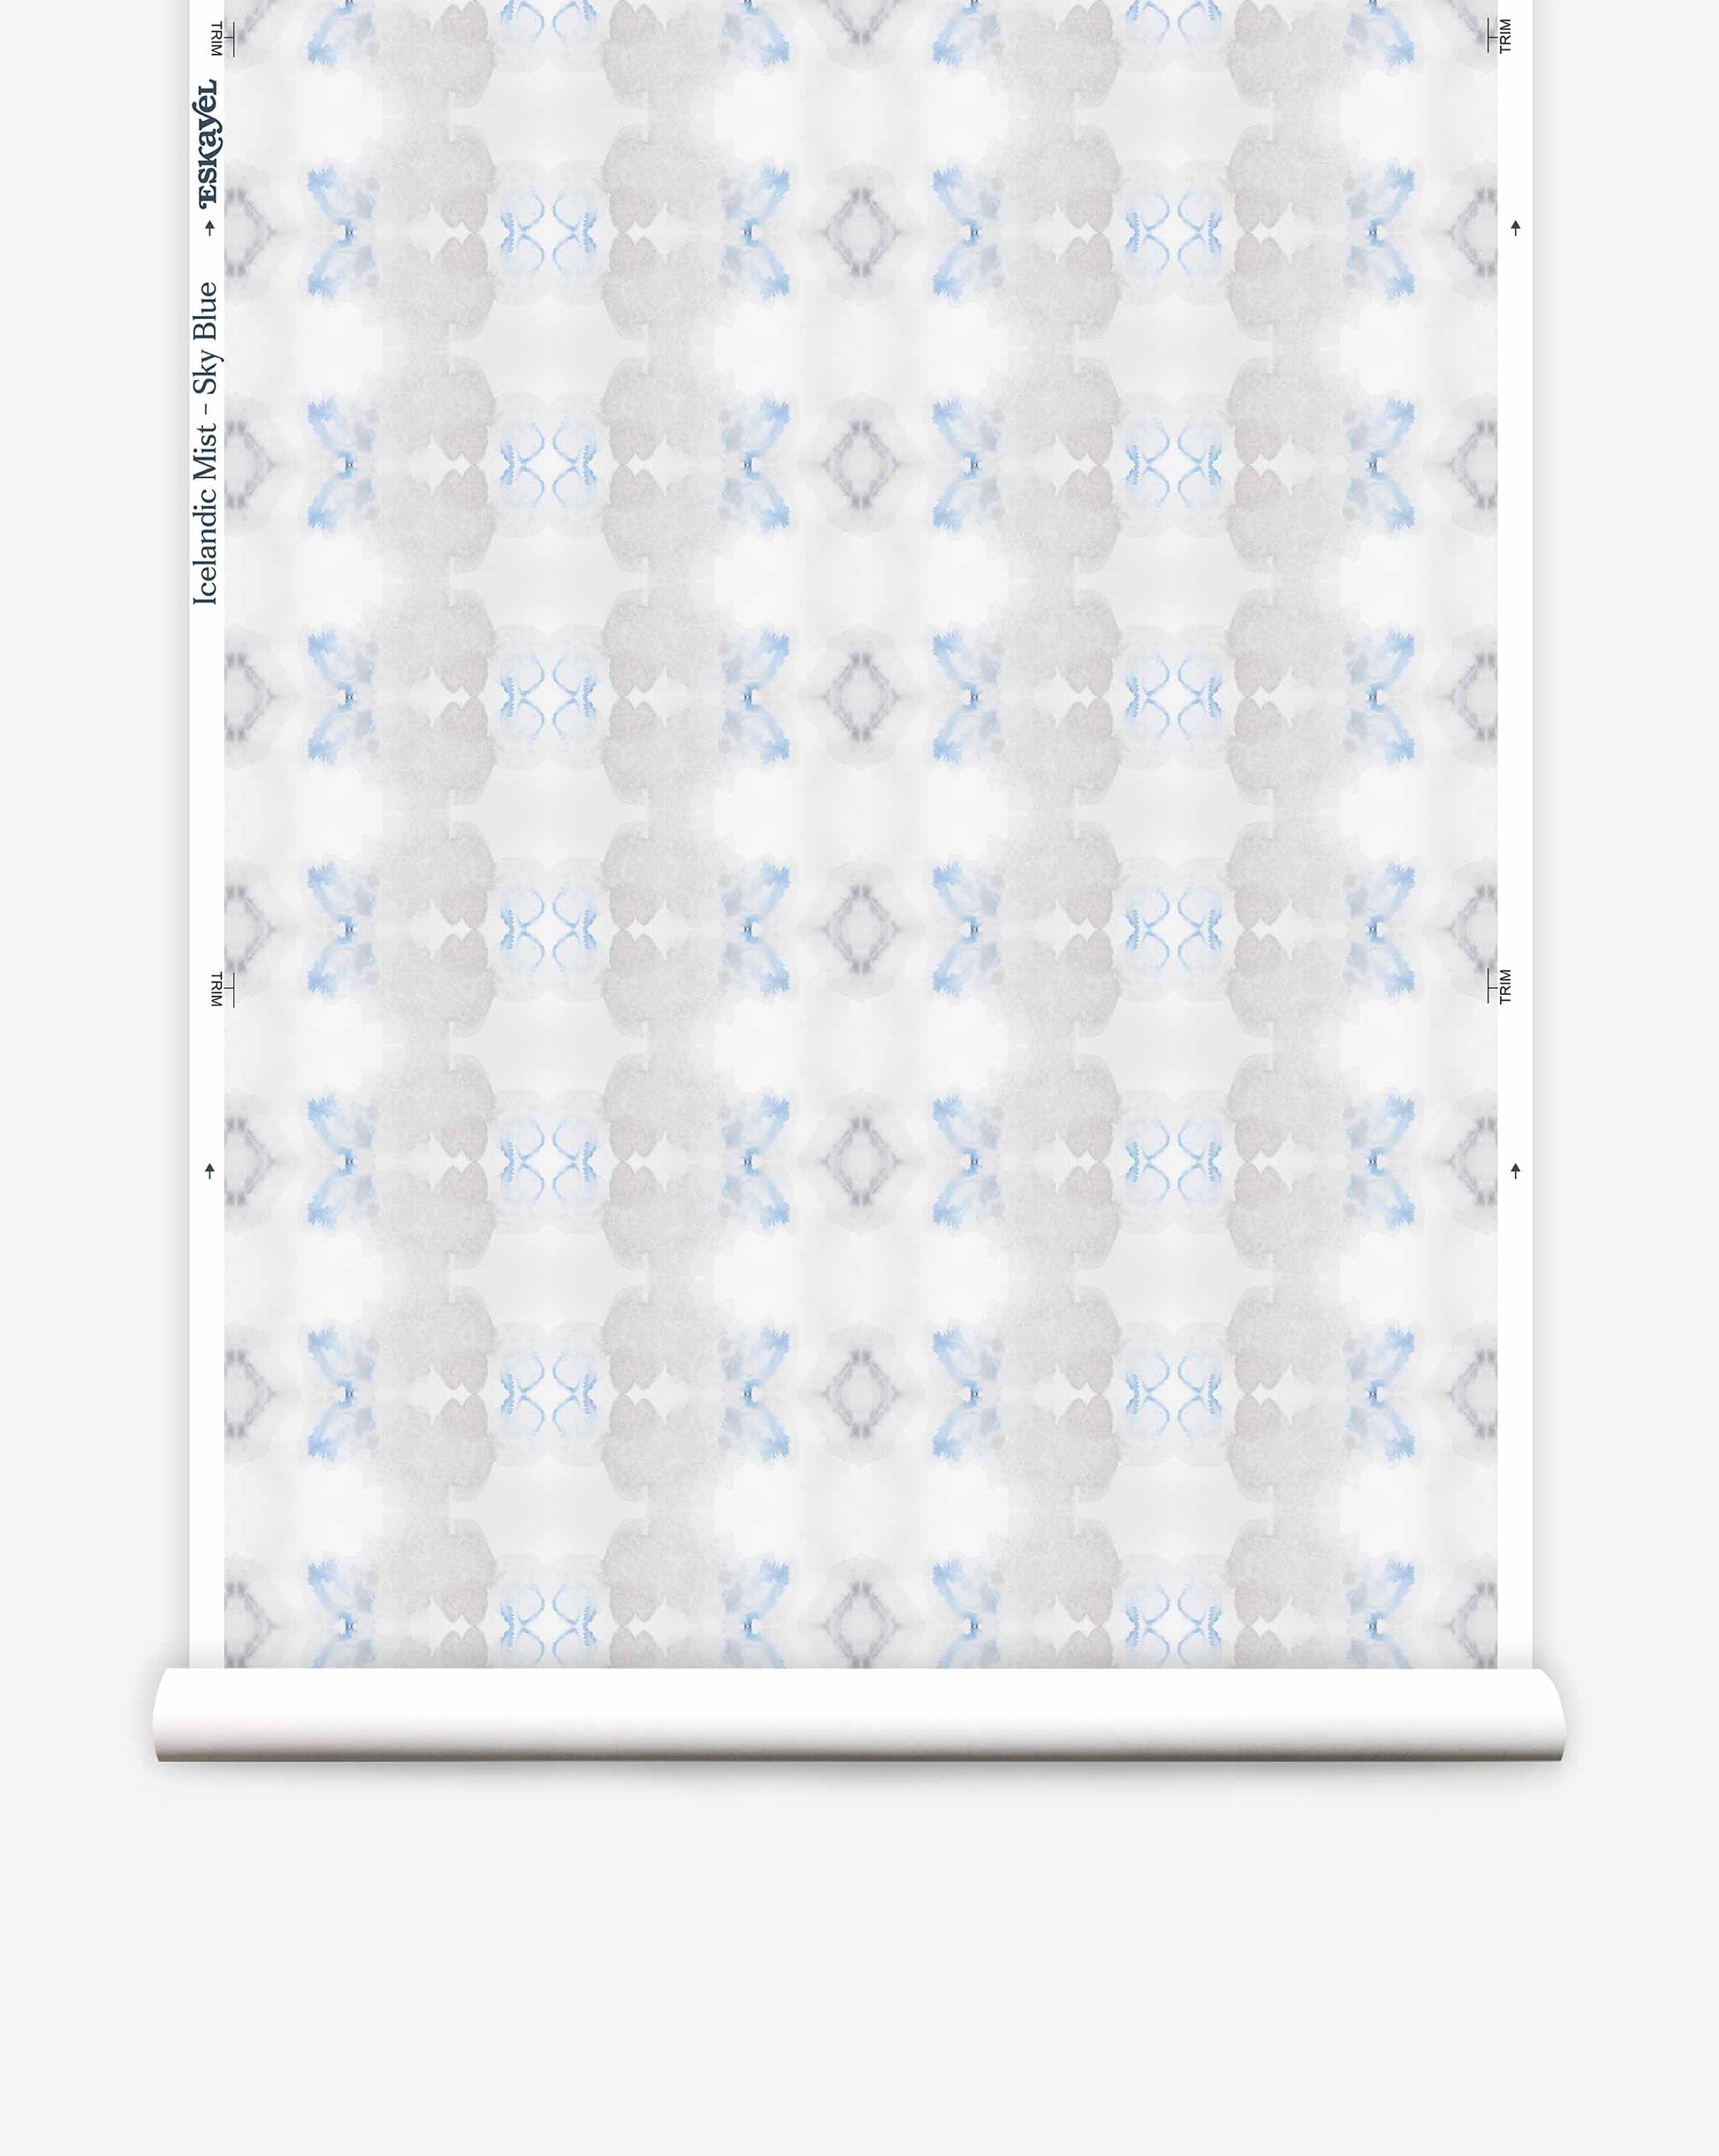 A scroll of Icelandic Mist Wallpaper||Sky Blue featuring a repetitive, symmetrical sky blue and Icelandic mist pattern on a white background, displayed vertically.